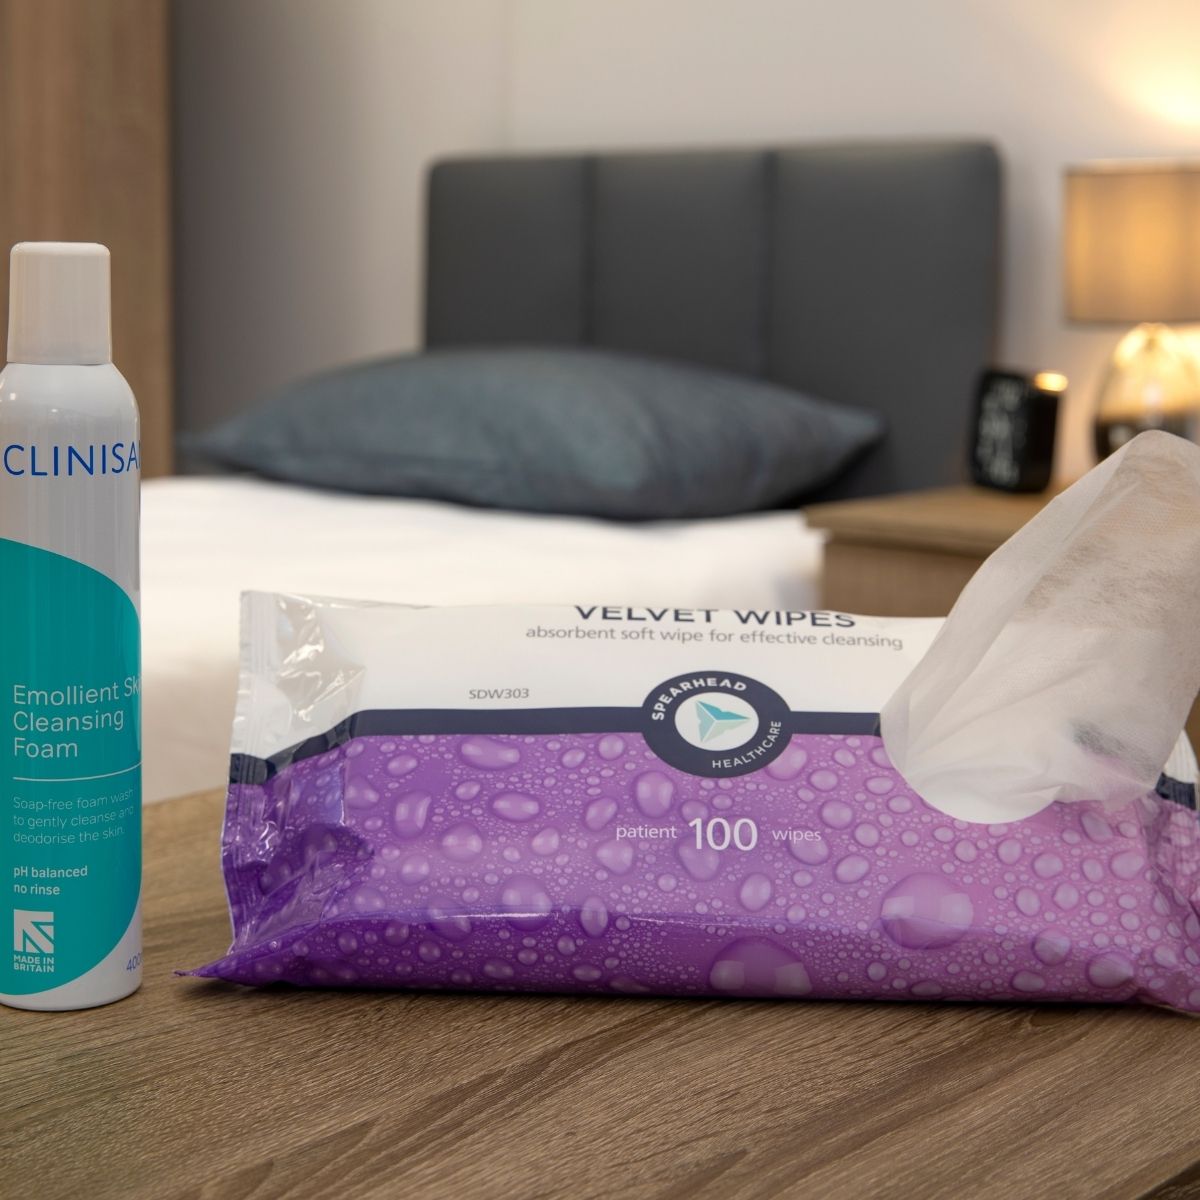 wipes and skin cleansing foam on bedside cabinet